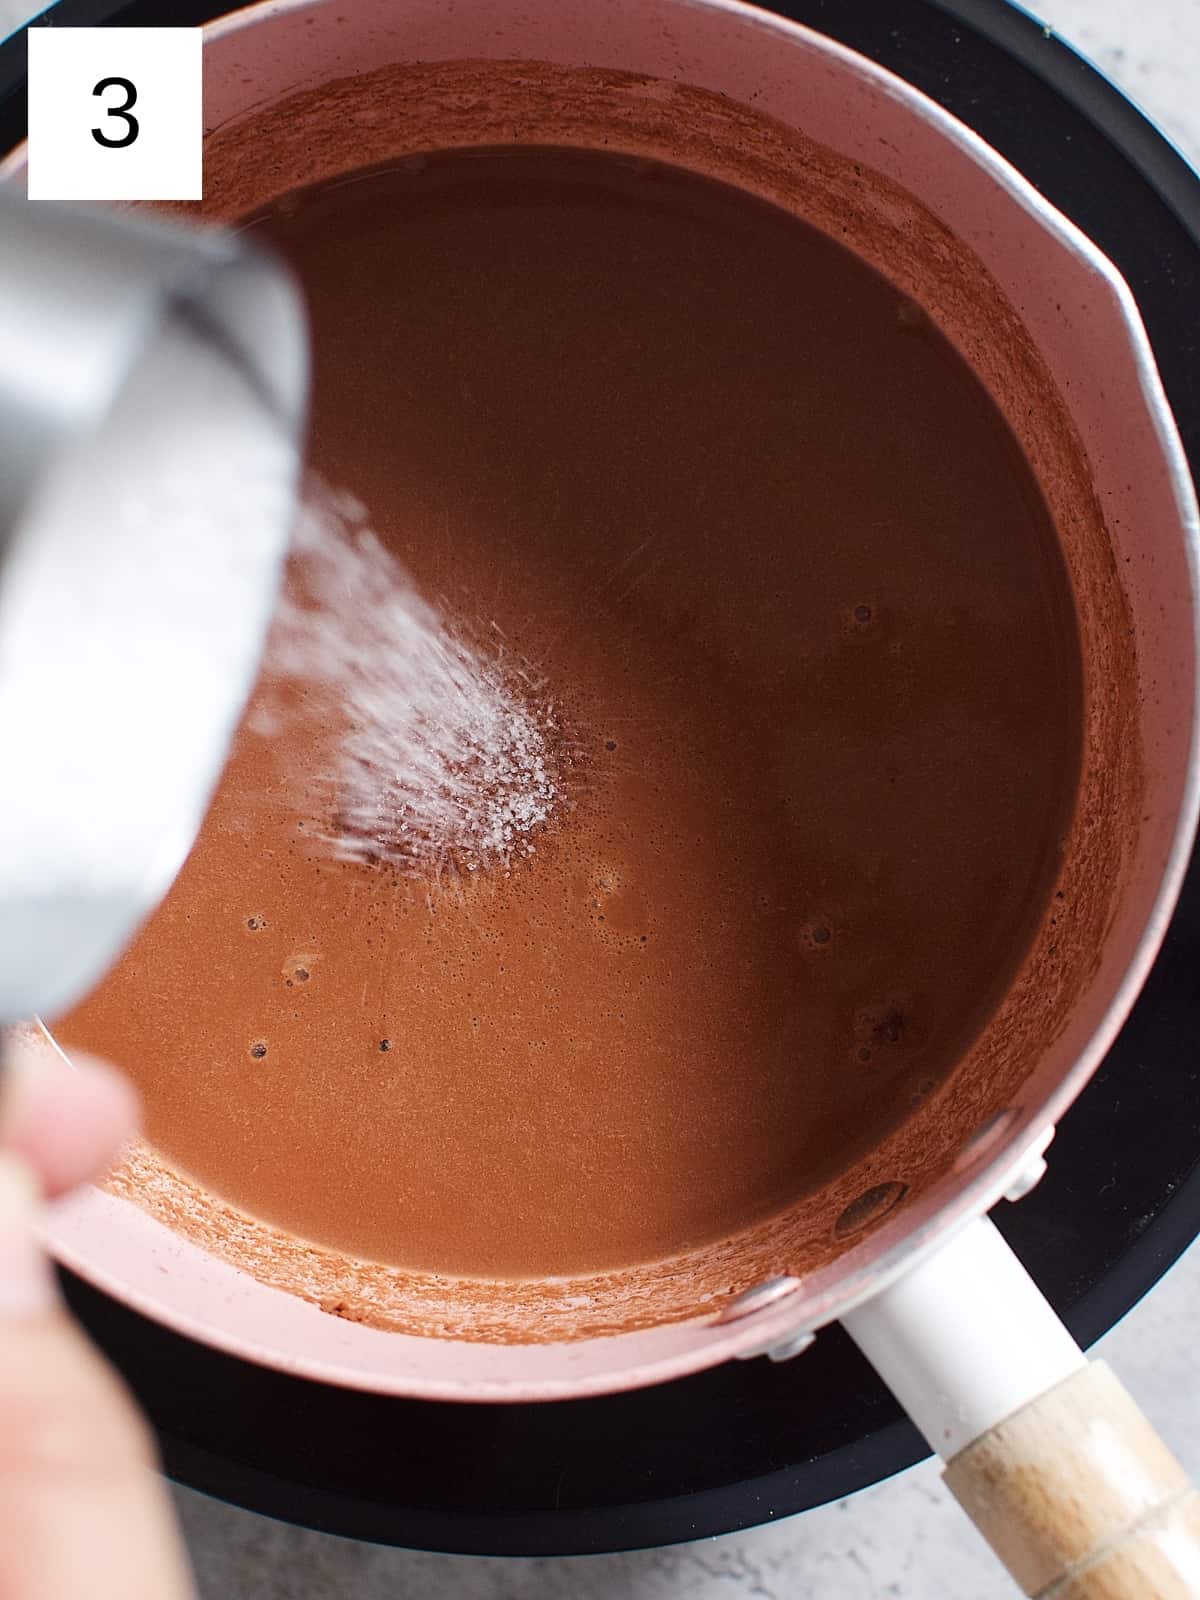 Adding granulated sugar and salt to the cocoa mixture in a heated sauce pan.